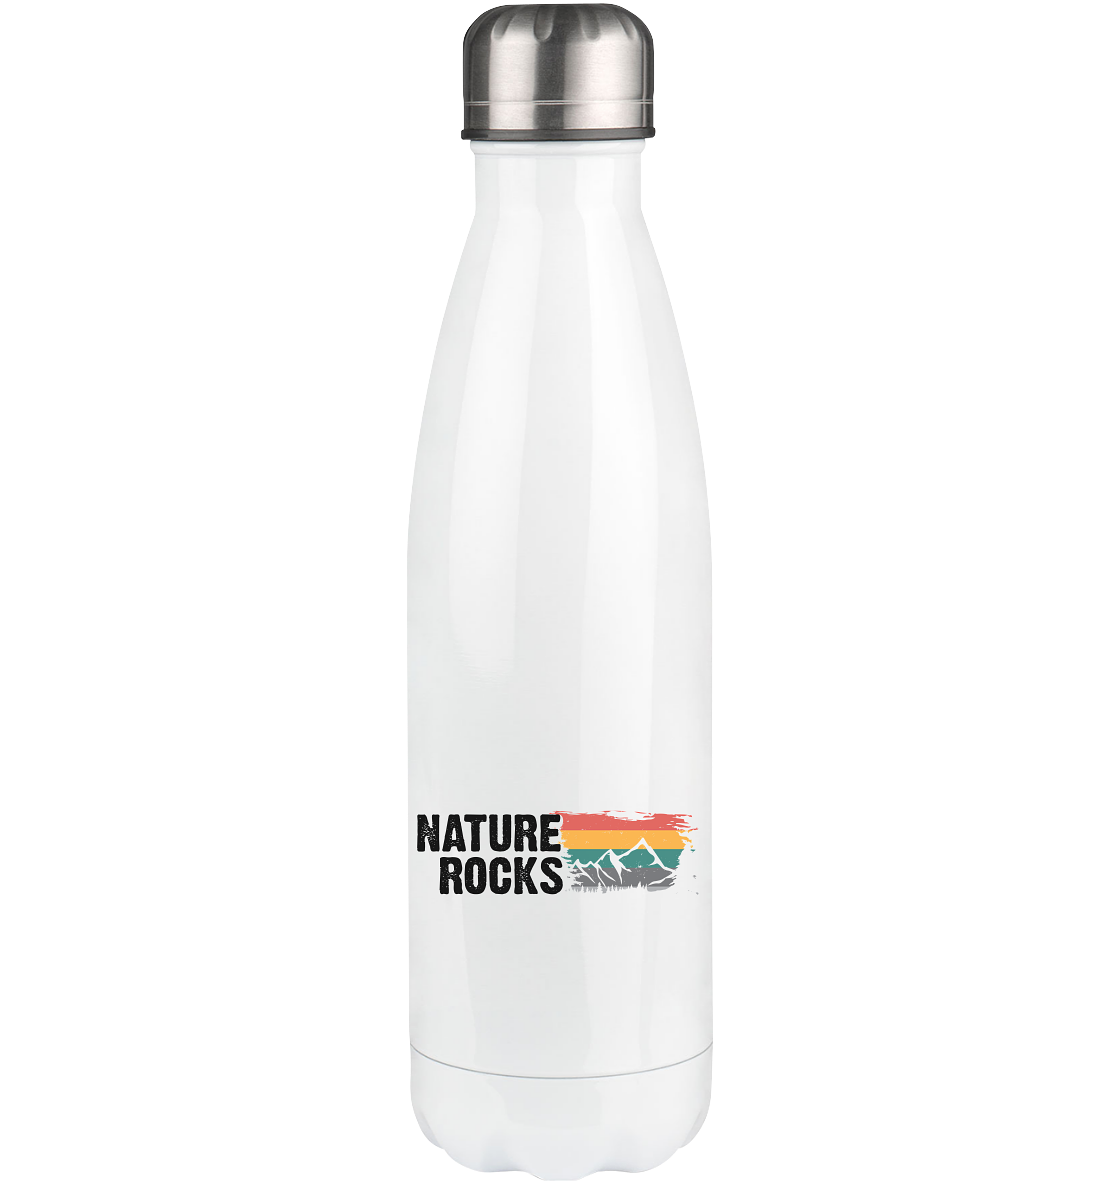 Nature Rocks - Edelstahl Thermosflasche berge camping wandern 500ml